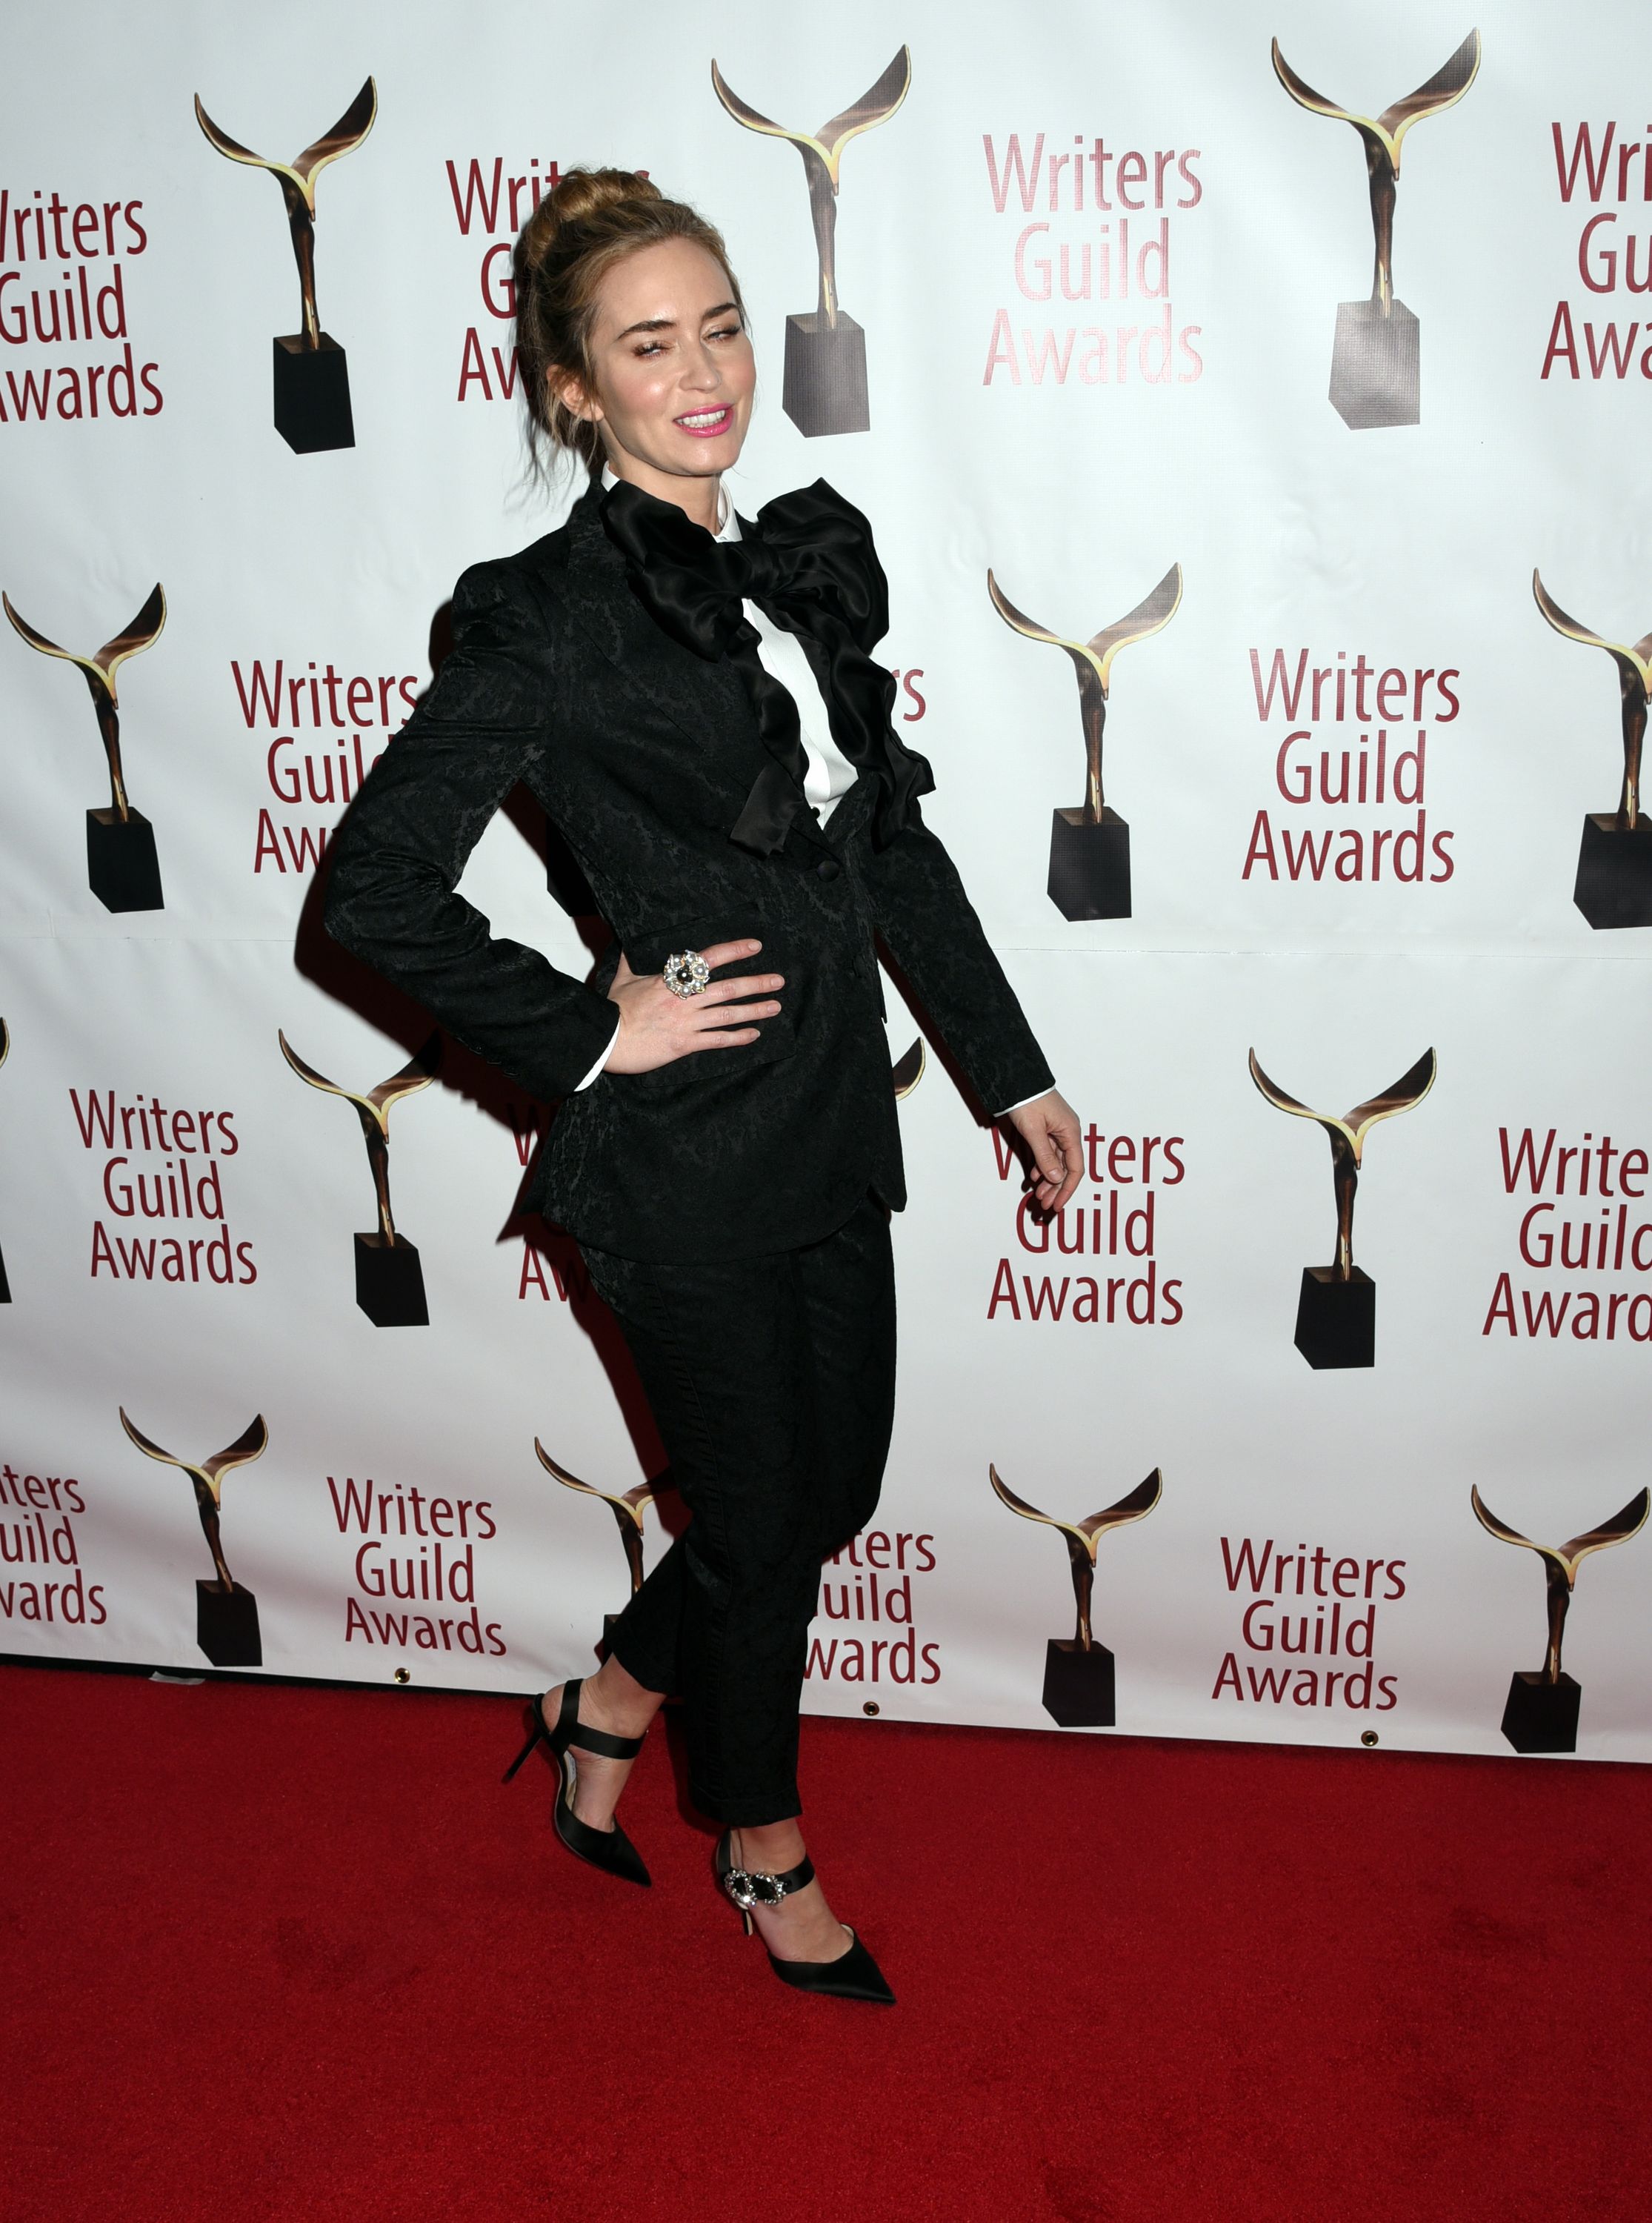 2019-02-17-71st-Annual-Writers-Guild-Awards-150.jpg